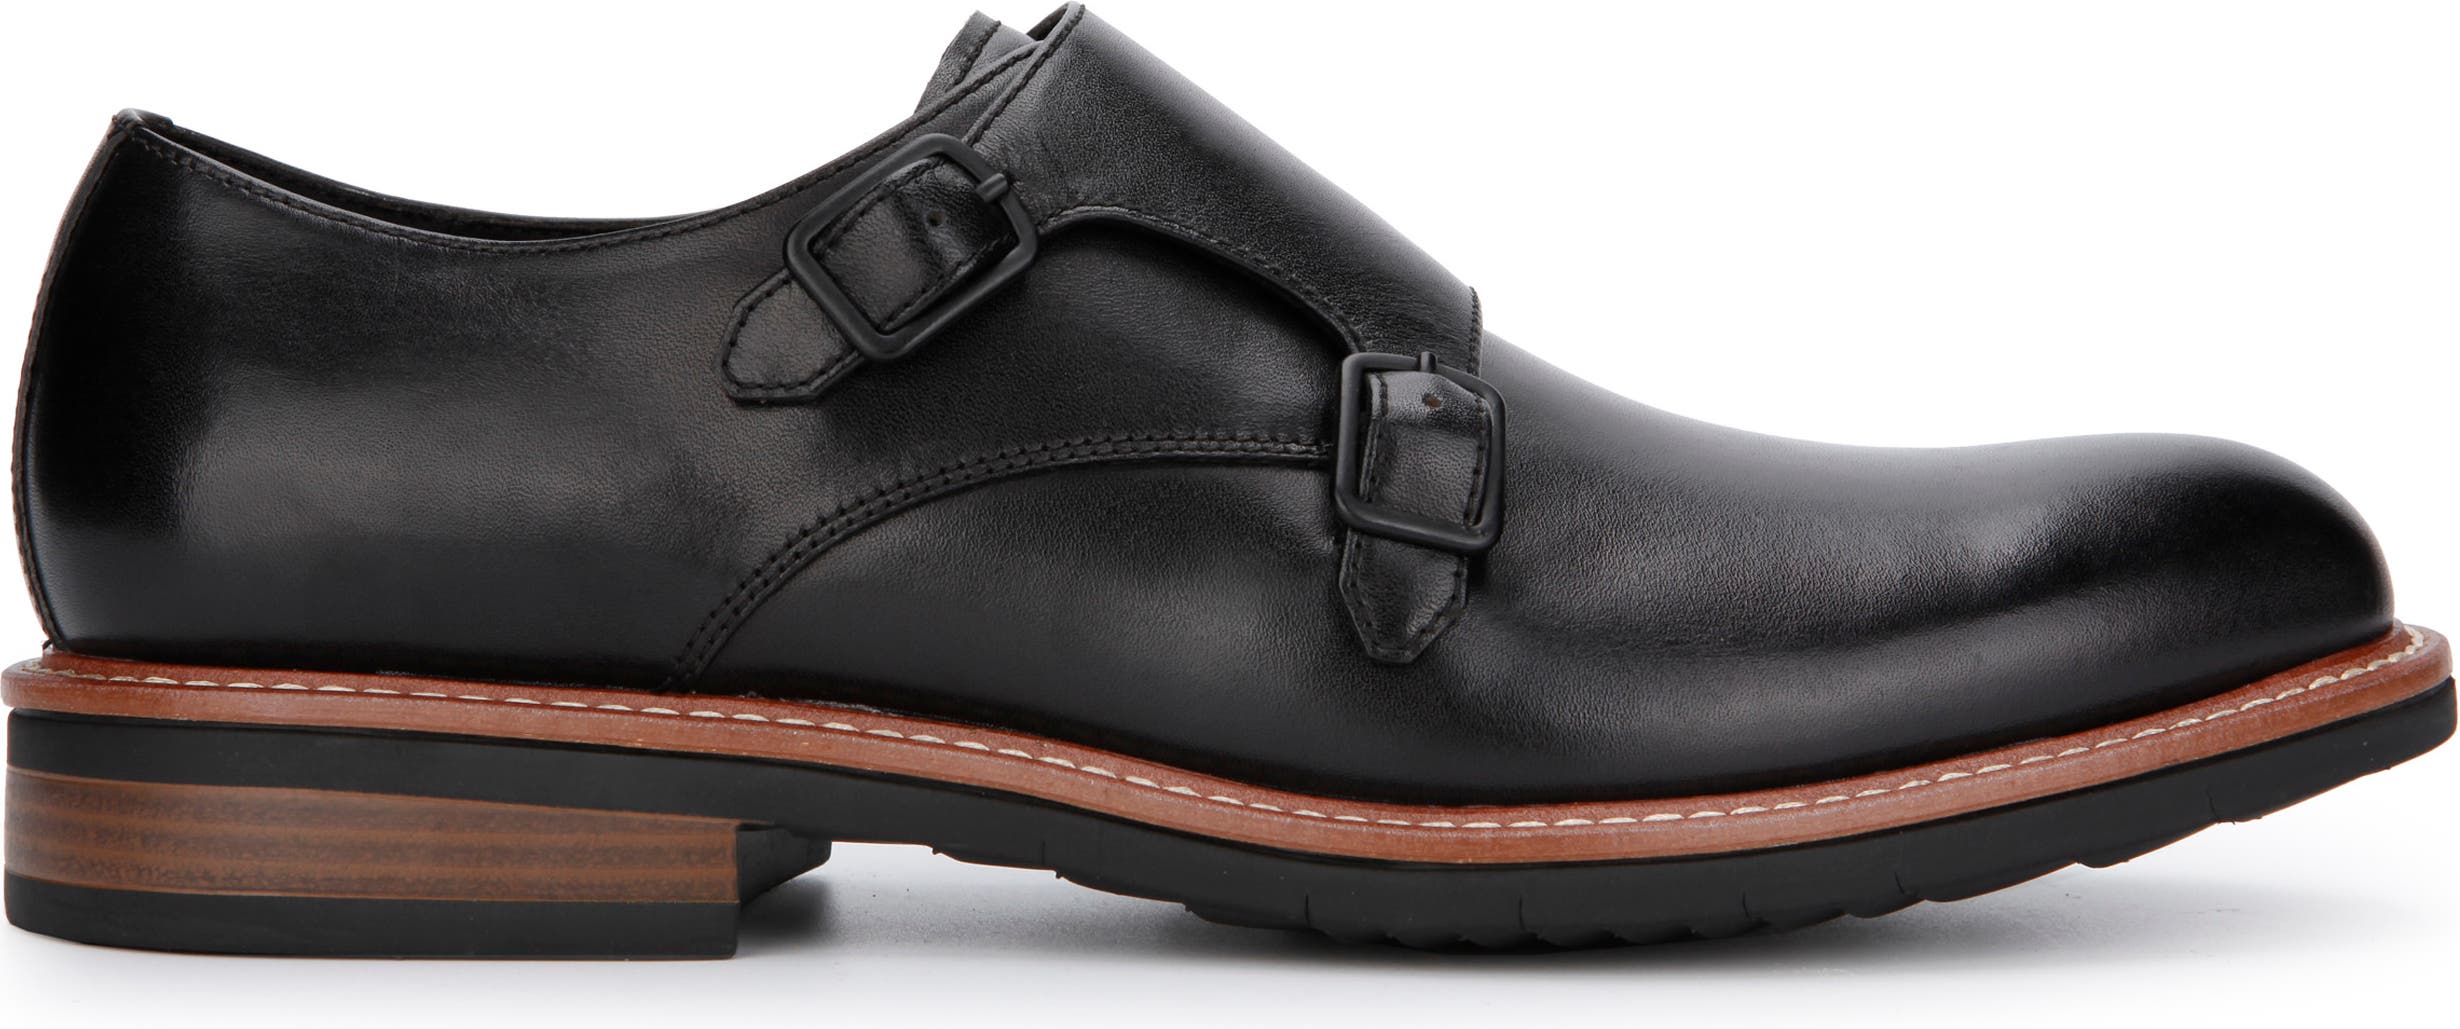 K Kenneth Cole Reaction In The Club Monk Strap Kenneth Cole Reaction Kids In The Club Little Kid/Big Kid 